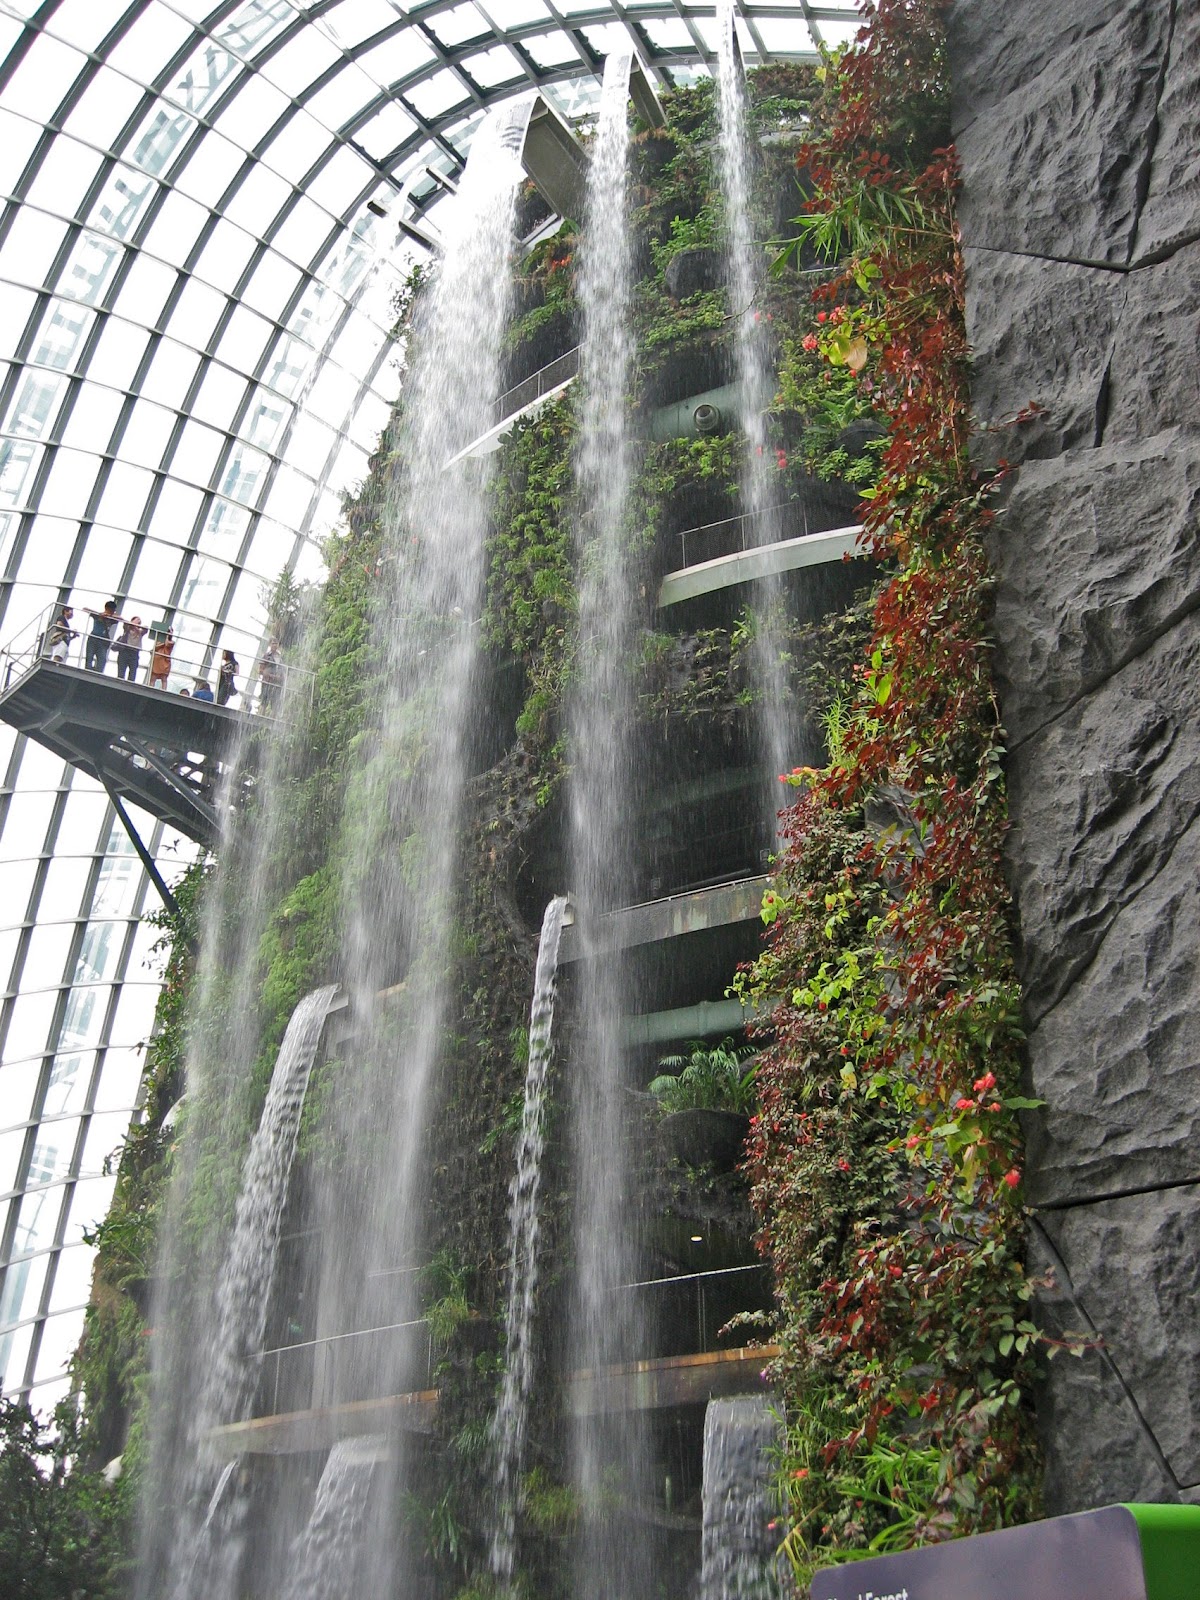 Jax Stumpes: Singapore Gardens by the Bay (9/9/2012)